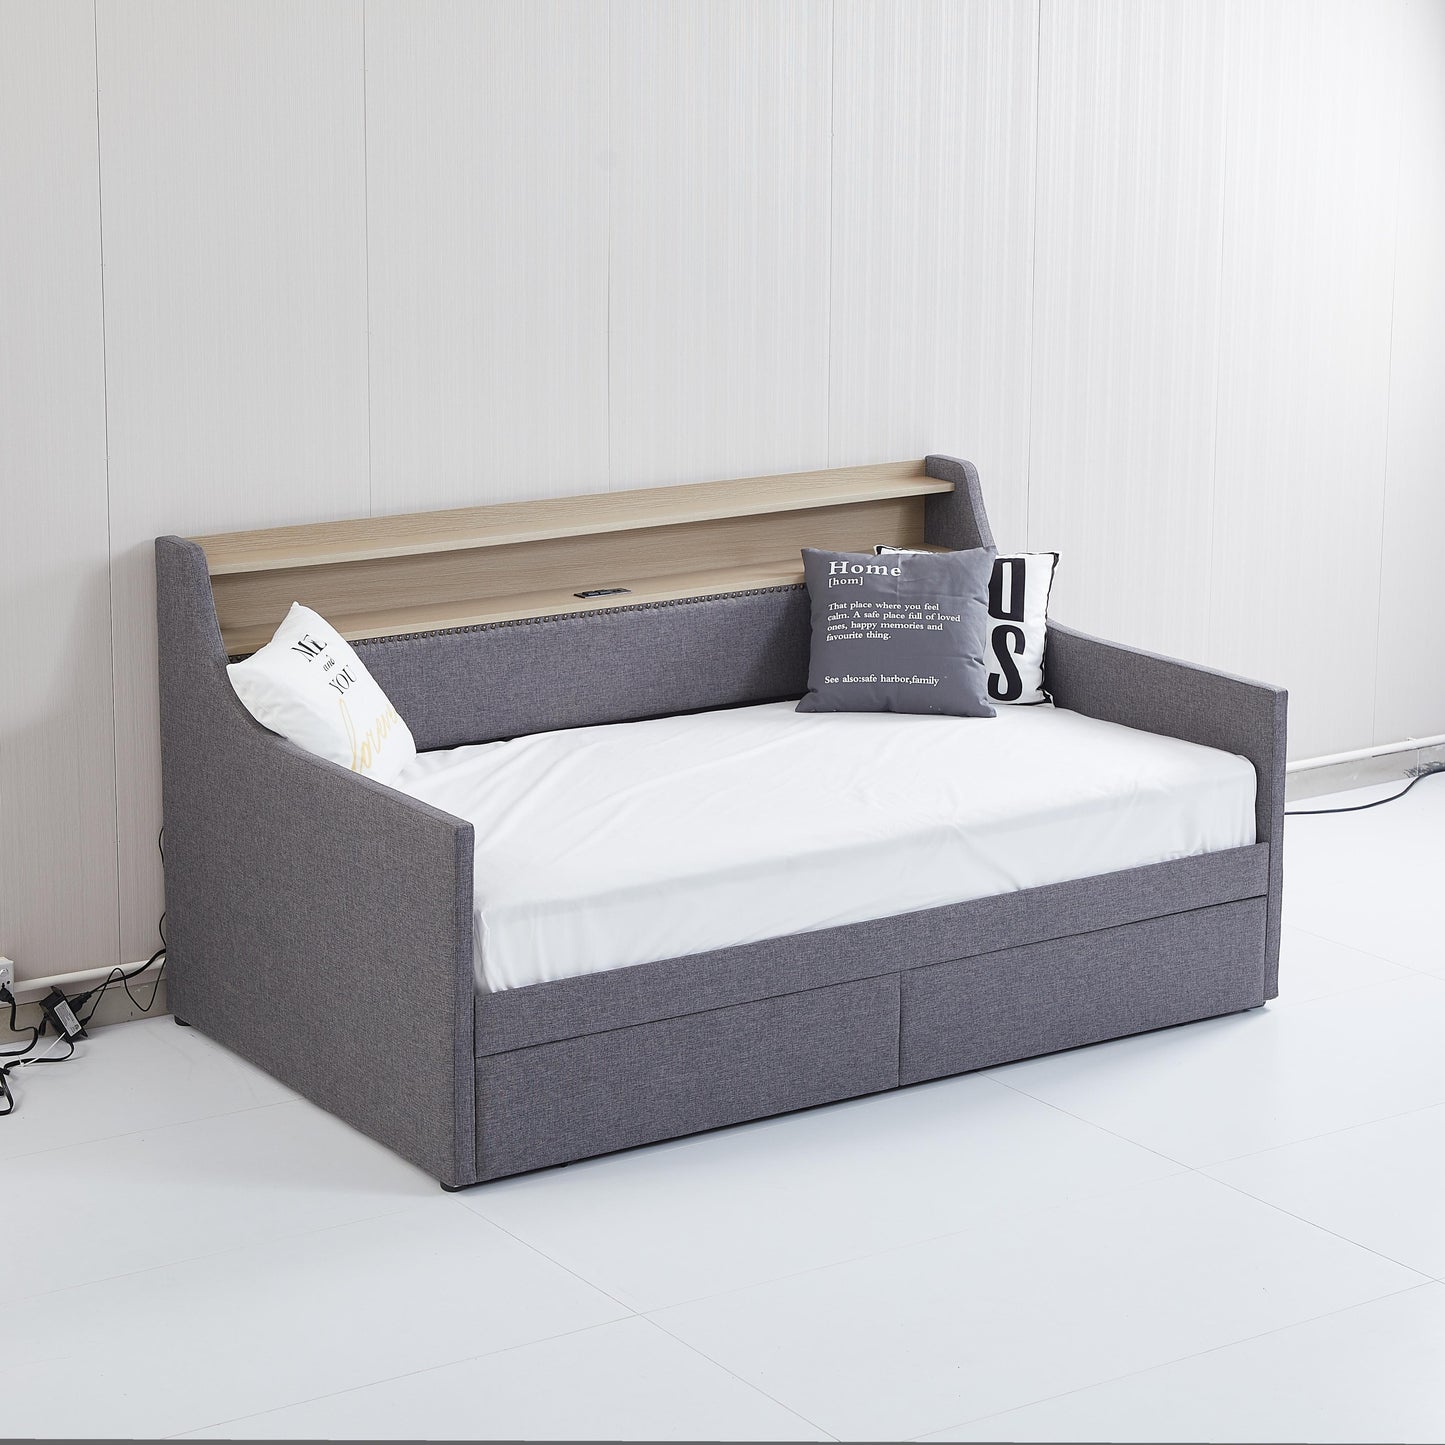 Twin Size Daybed with Storage Drawers, Upholstered Daybed with Charging Station and LED Lights, Gray